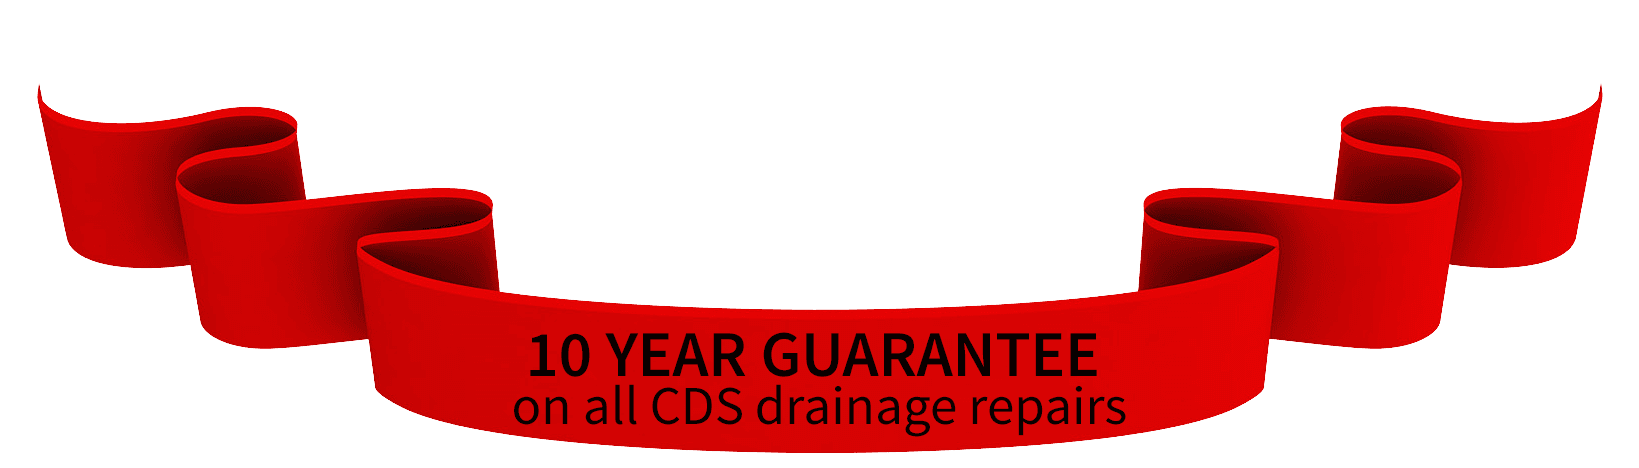 10 year guarantee on blocked drain repairs Commercial Drainage Services